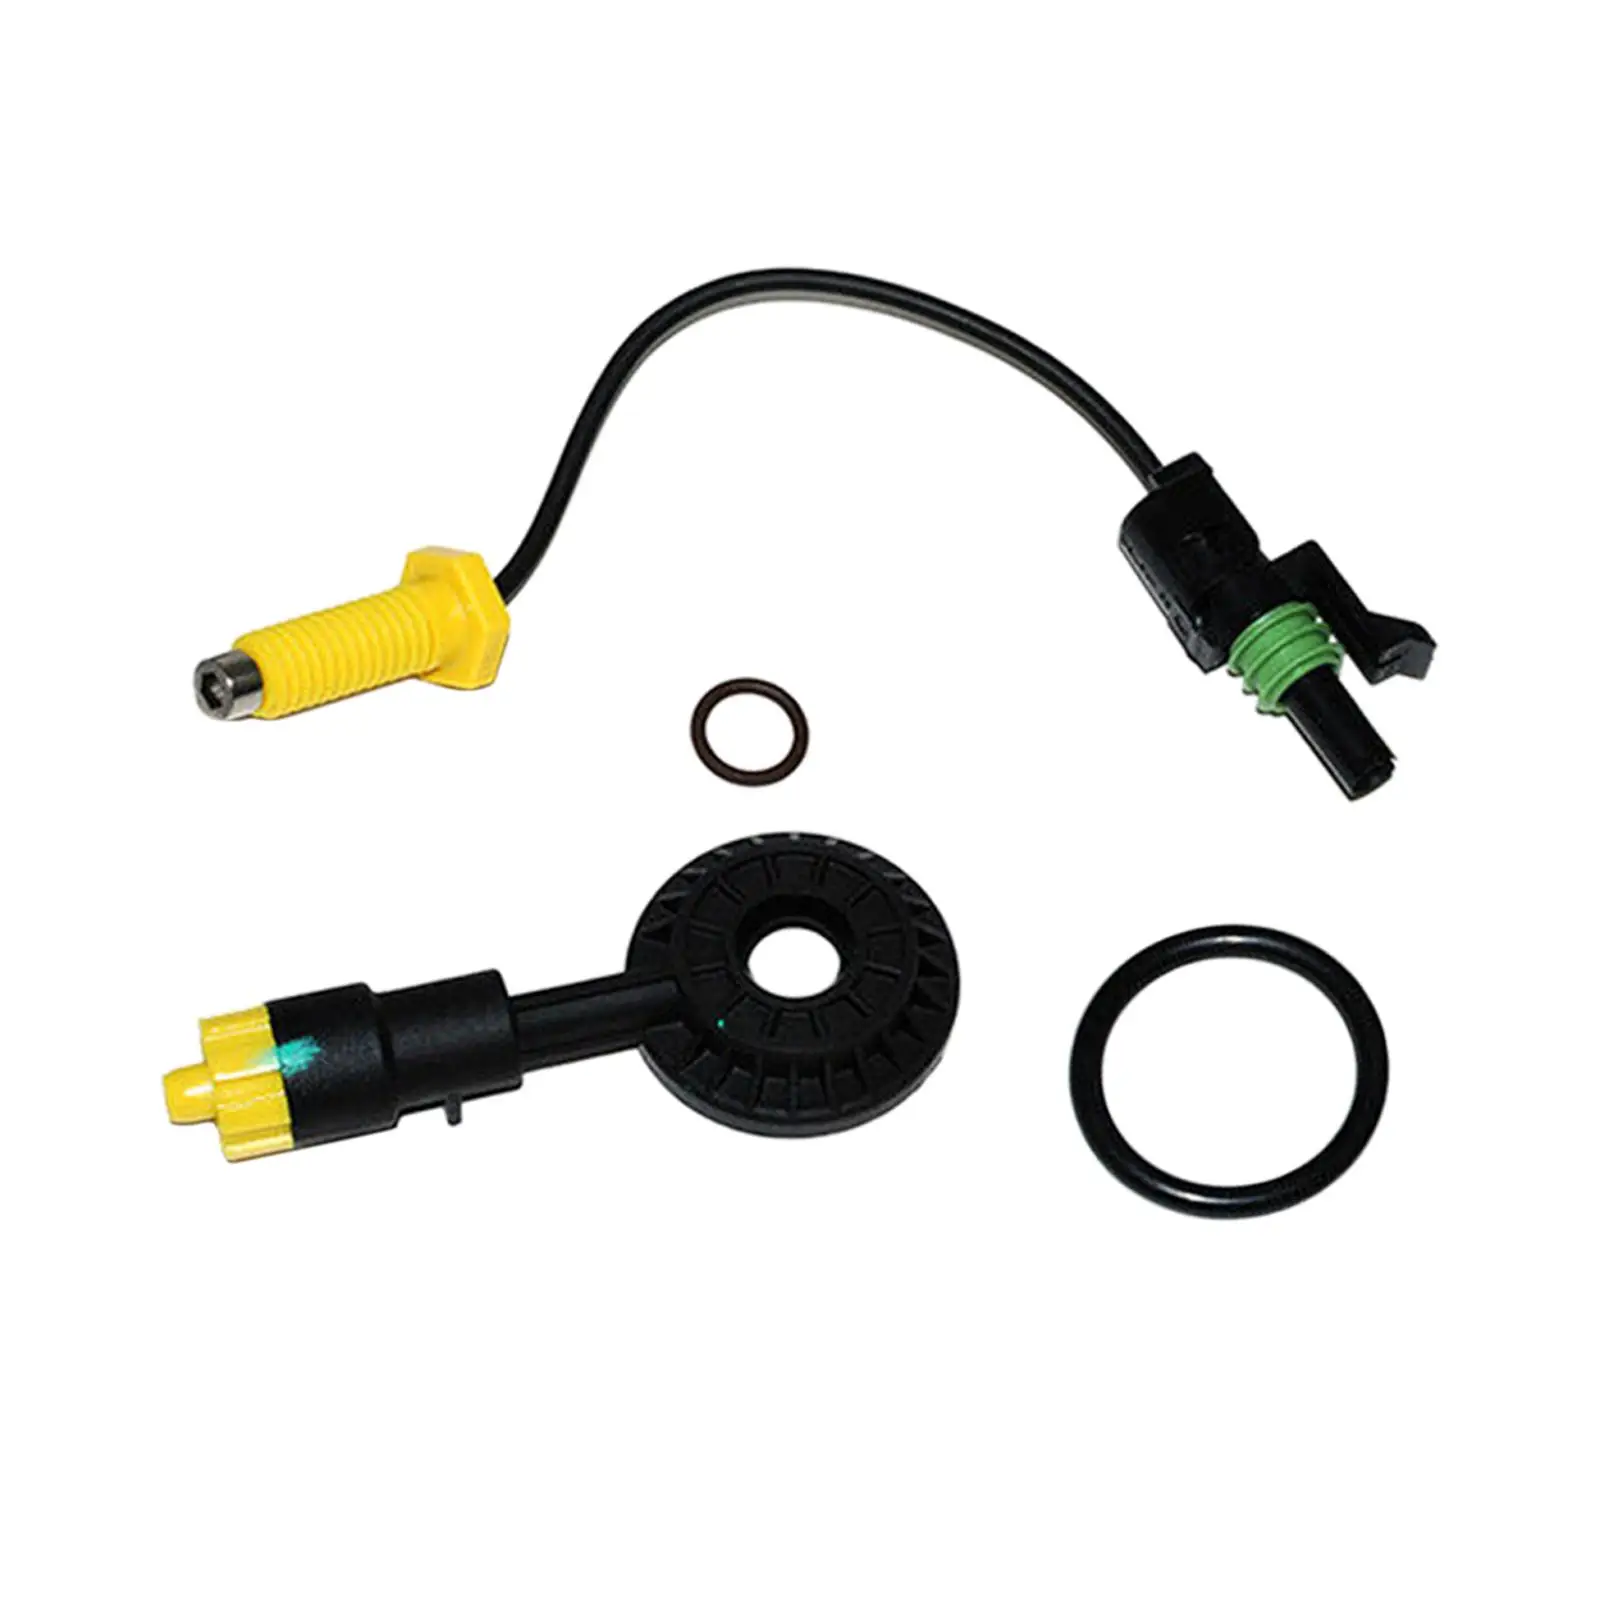 New Fuel Water Sensor for DISCOVERY 3 All Model Years